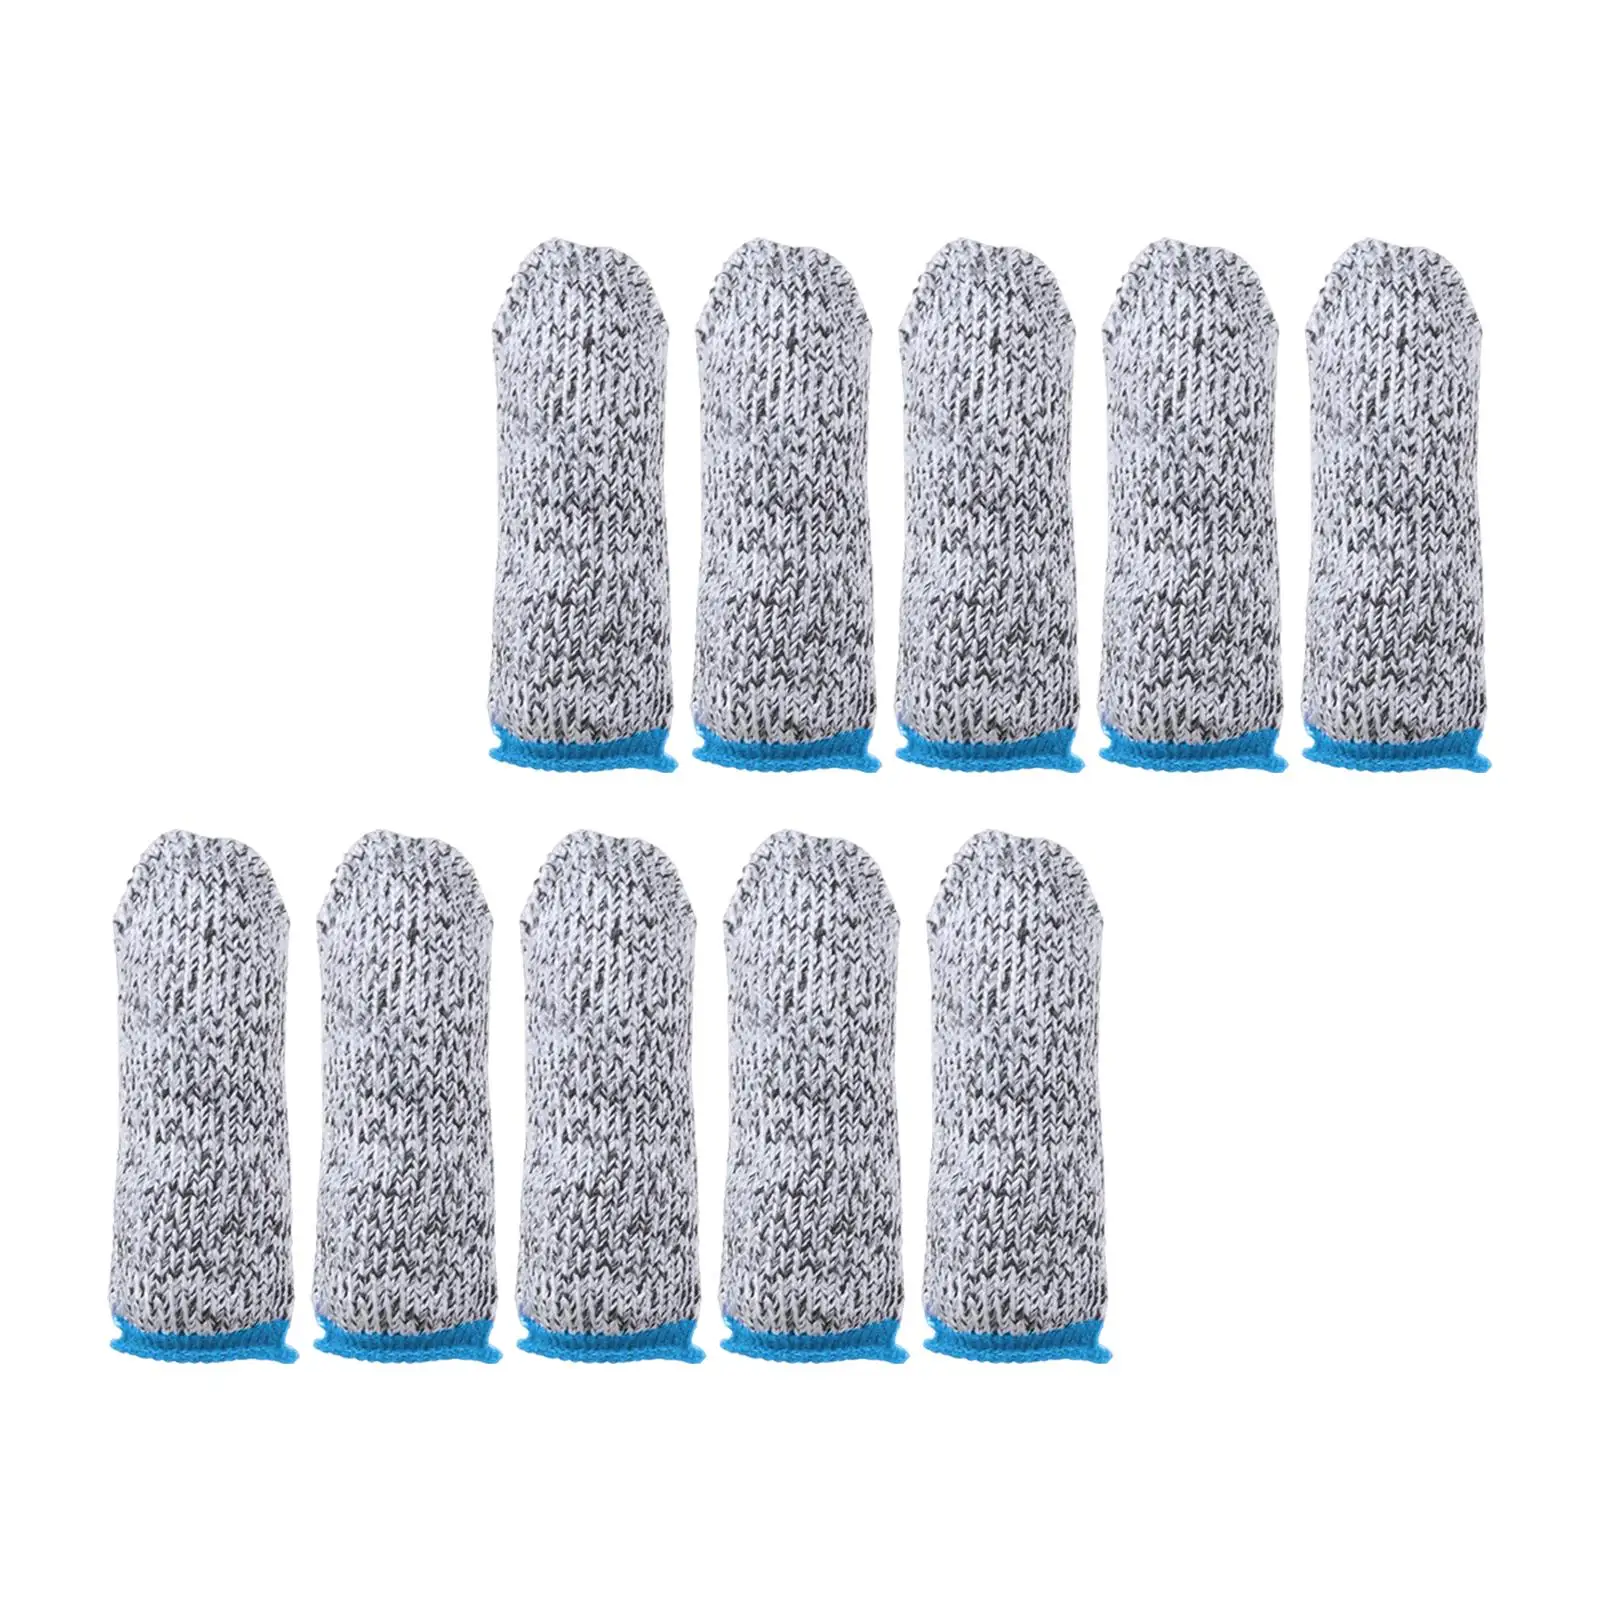 10x Finger Thumb Cots Non Slip Fingertip Cover Finger Sleeves Cut Resistant for Sculpturing Woodworking Picking Gardening Worker